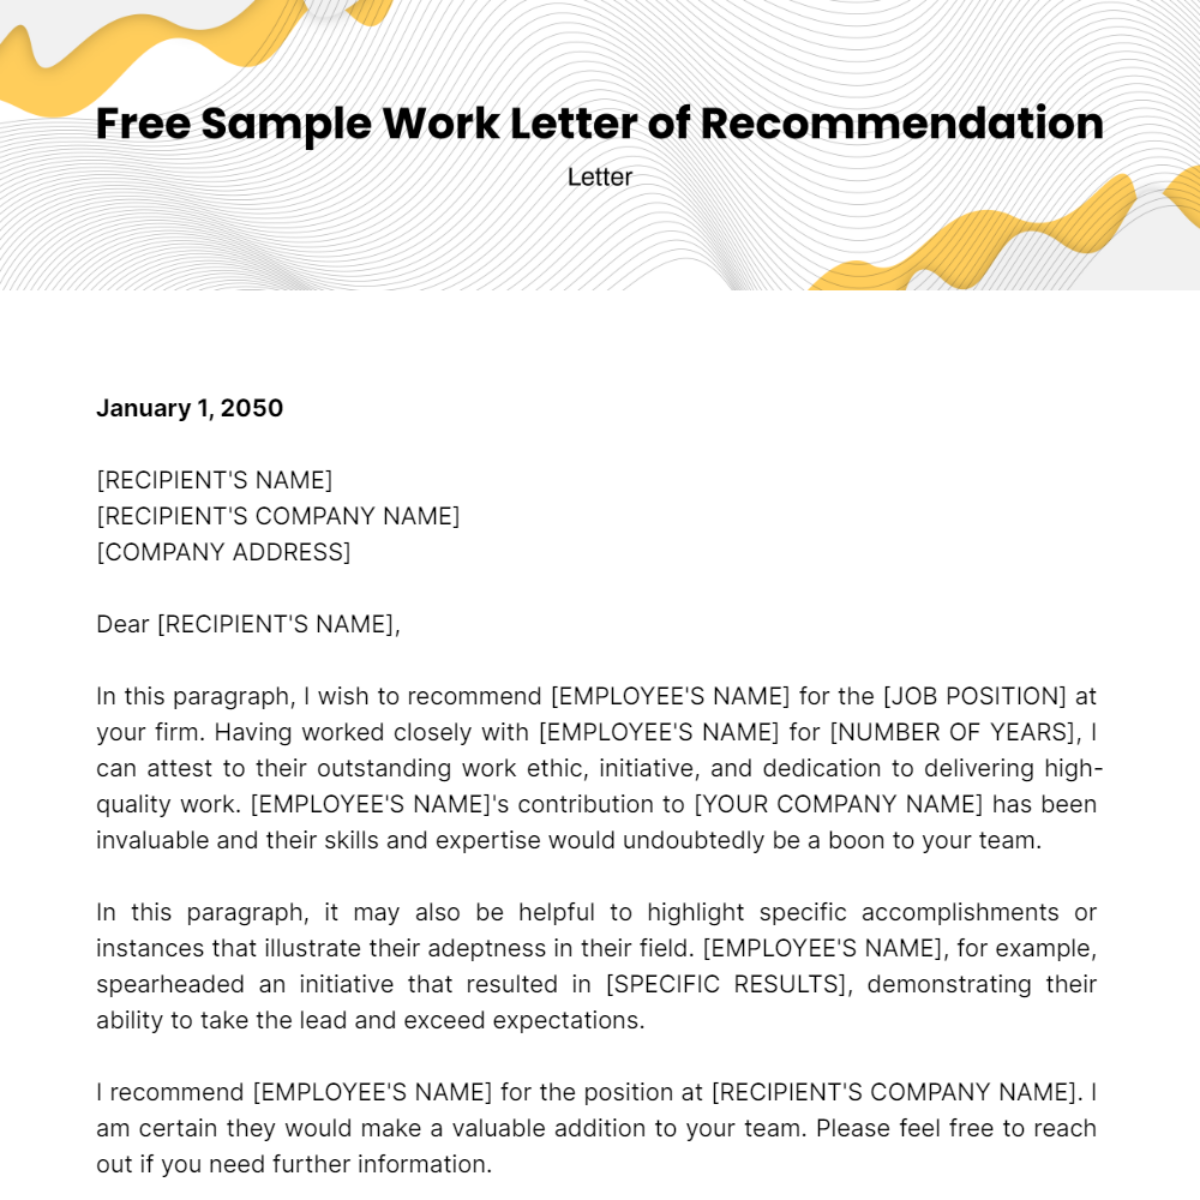 Sample Work Letter of Recommendation Template